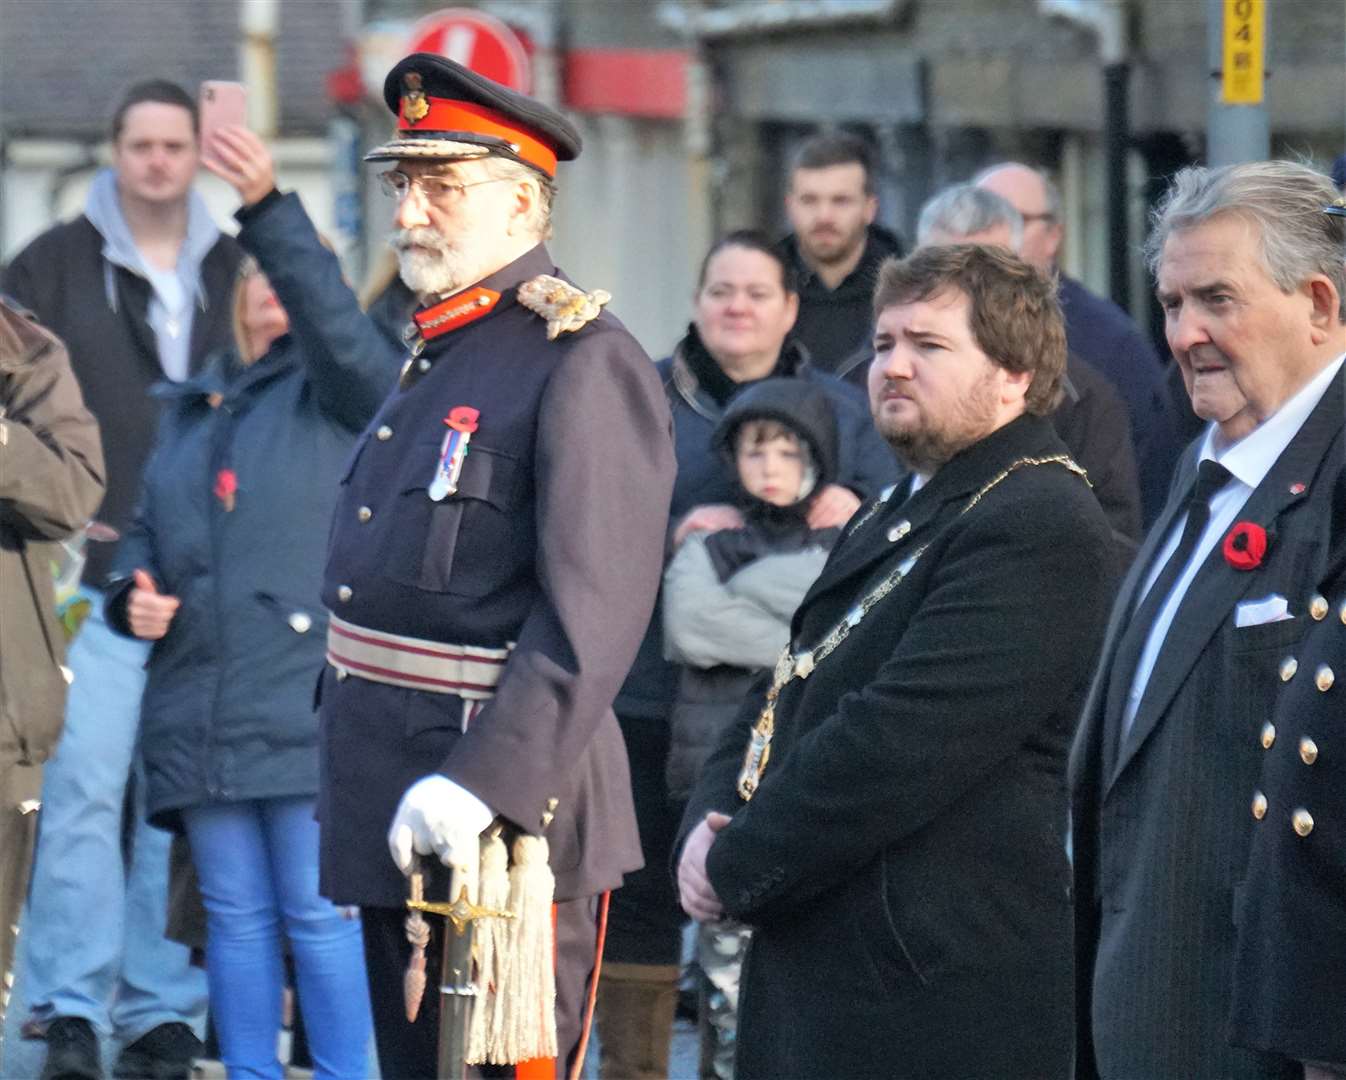 Remembrance parade in Thurso with, from left, Lord Thurso, Thurso Provost and local councillor Struan Mackie and Bert Macleod. Picture: DGS